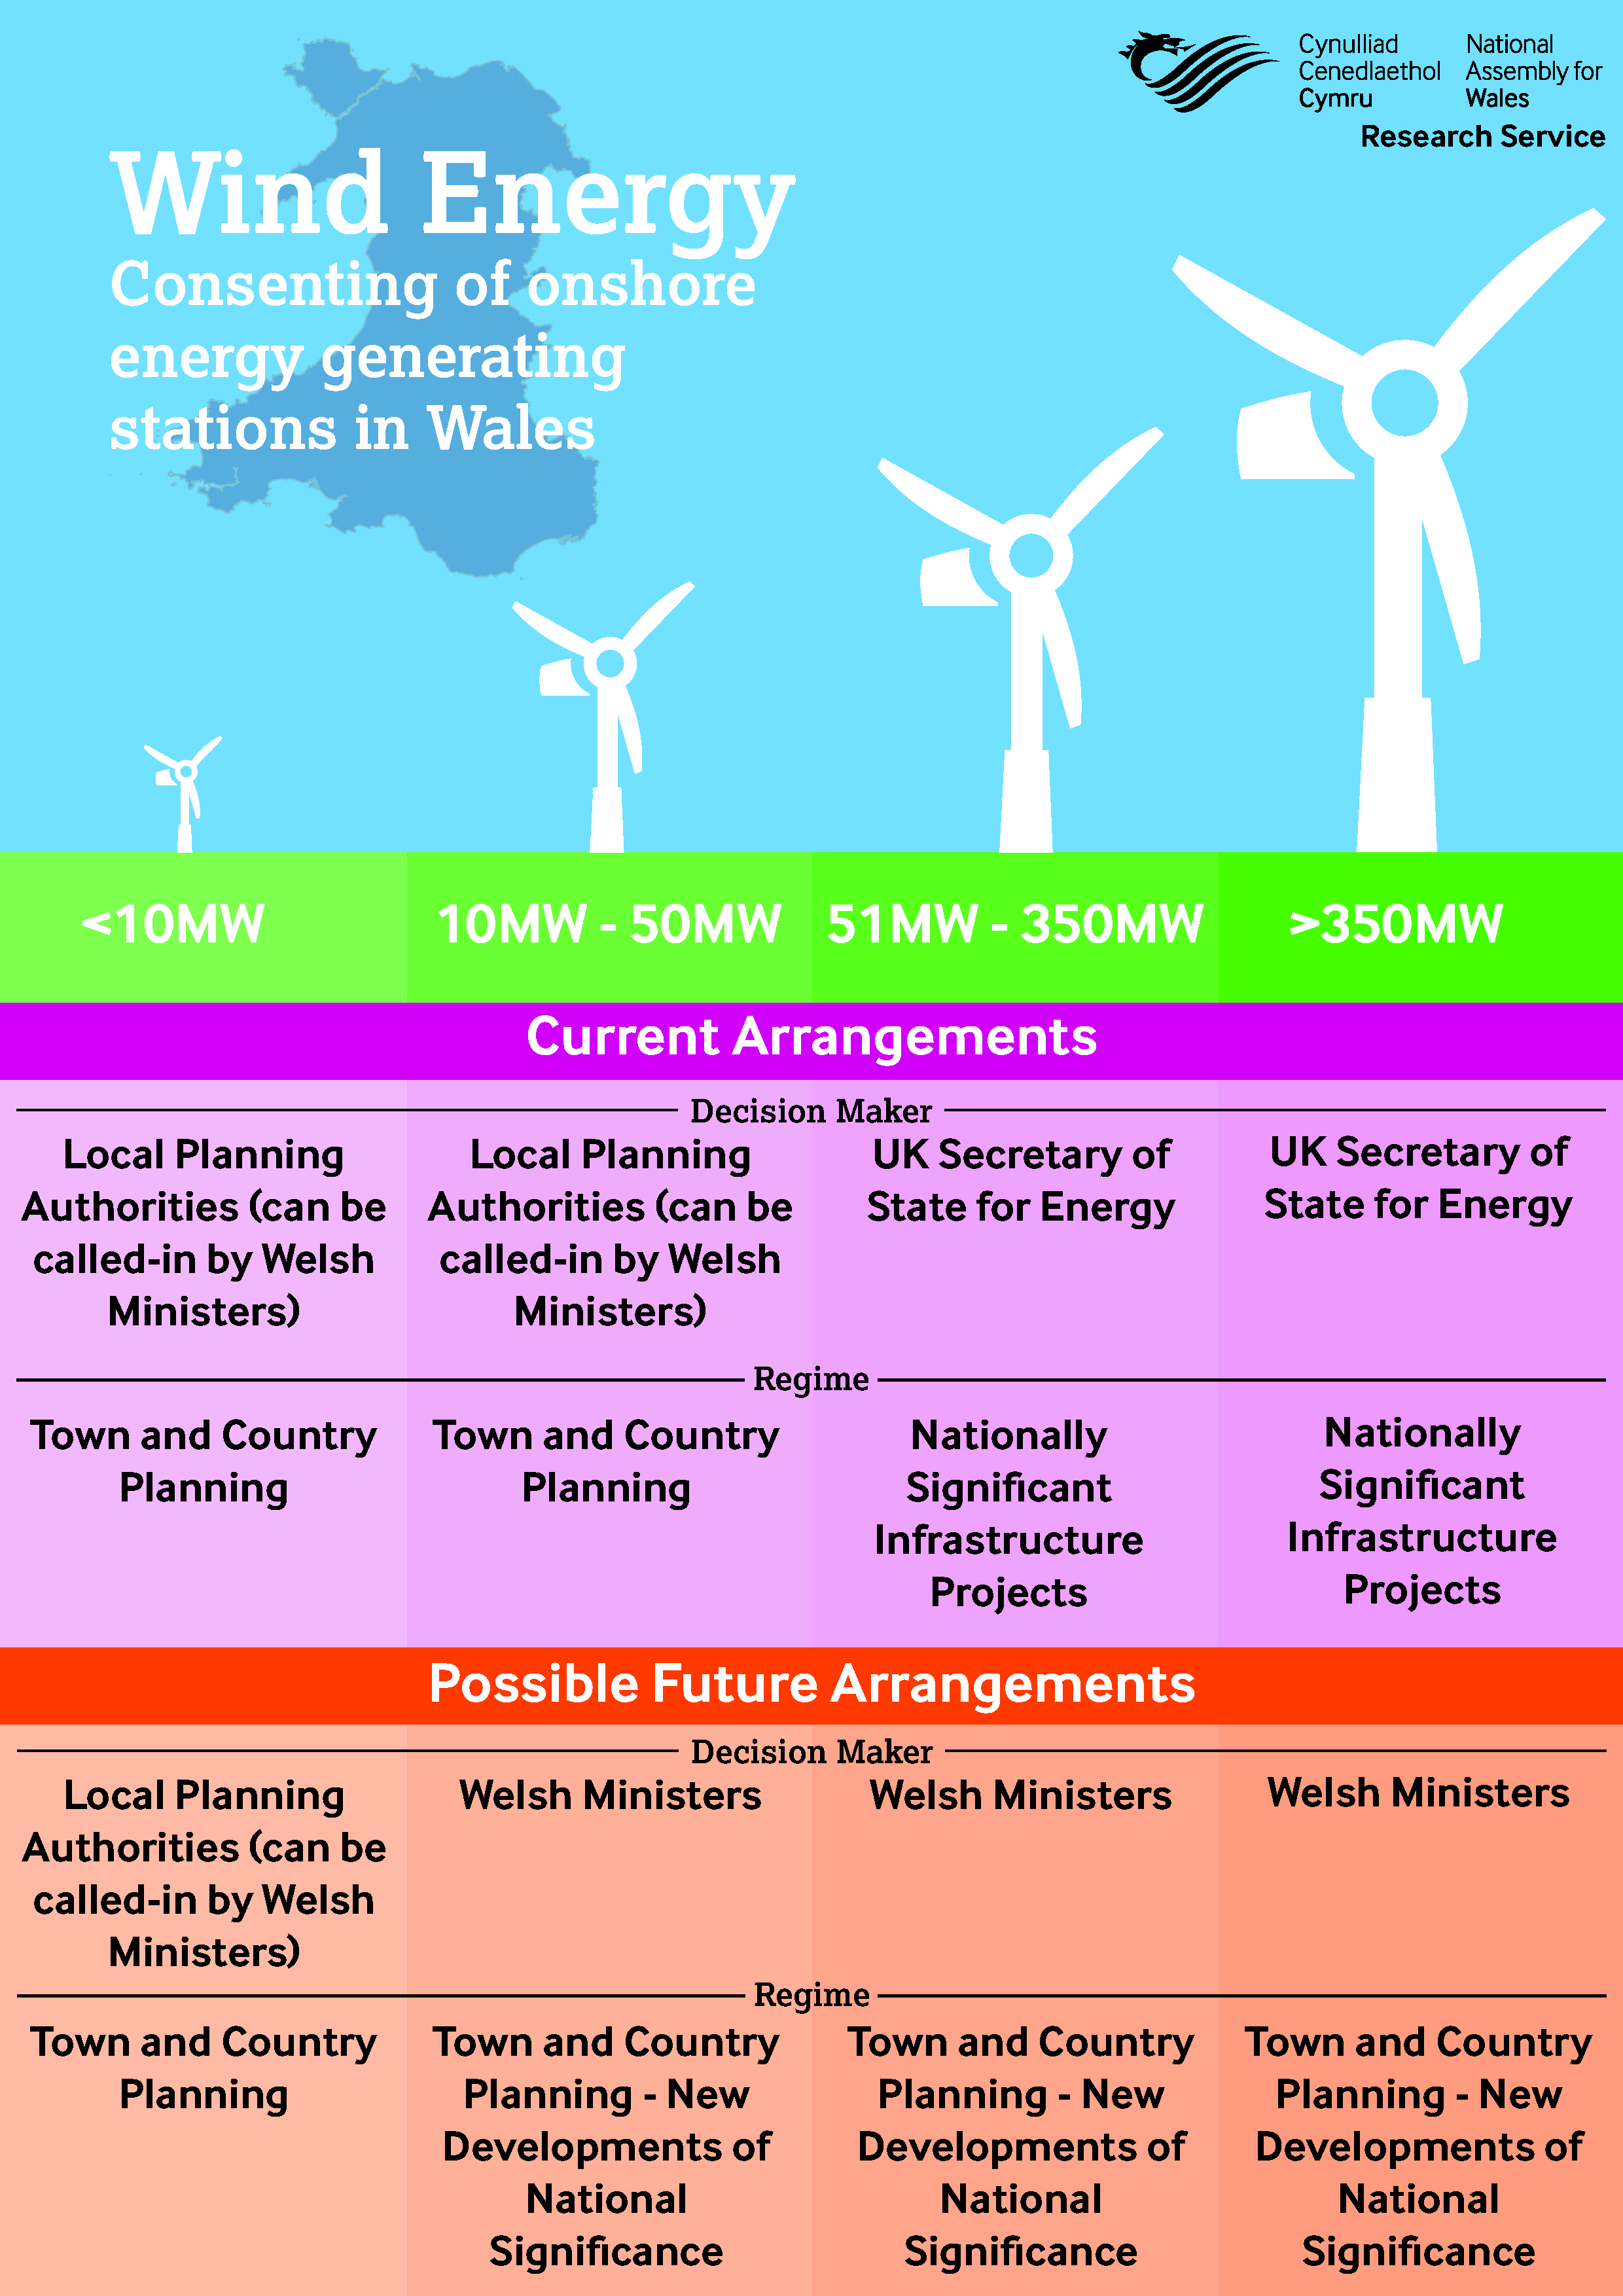 Infographic showing current and possible future arrangements for consenting onshore energy generating stations in Wales